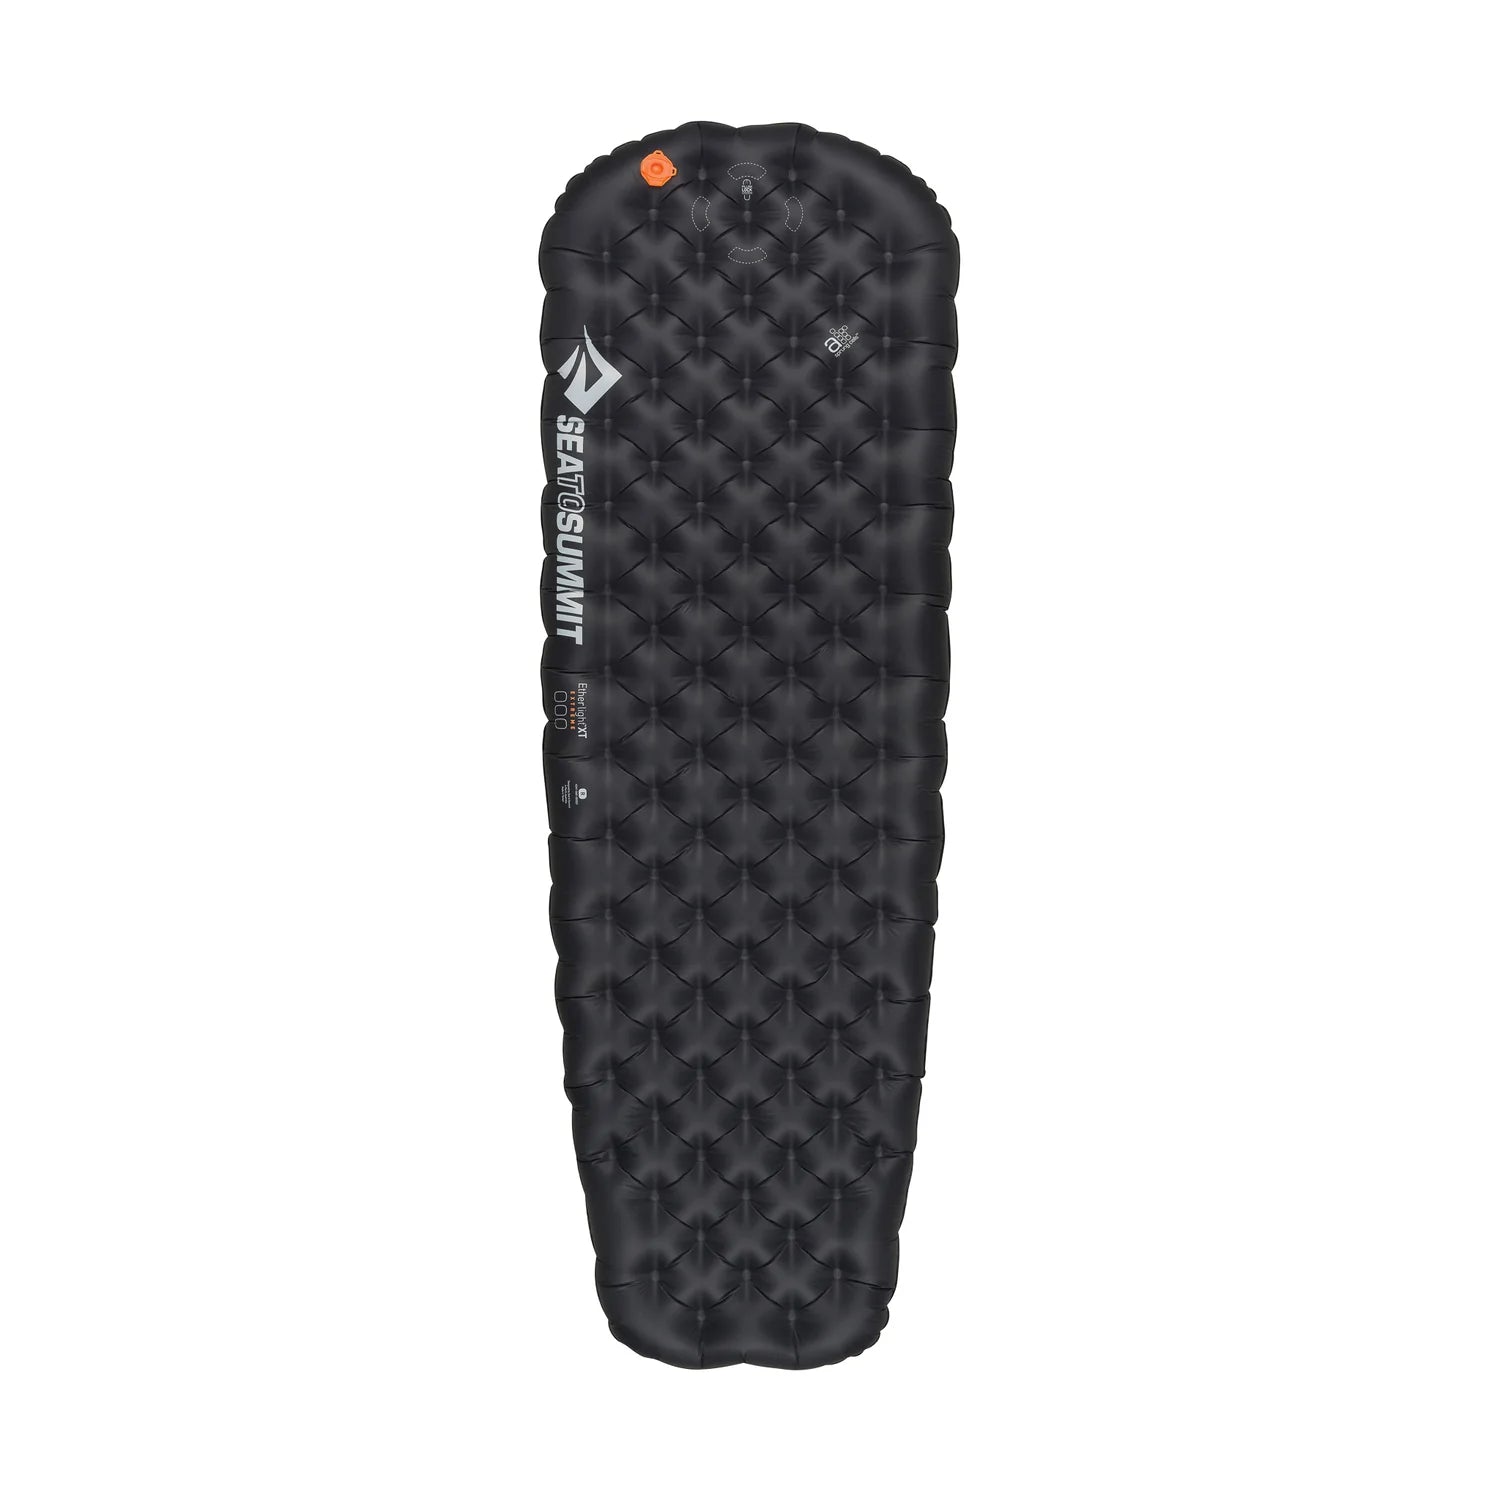 Regular-Ether-Light-Extreme-Insulated-Air-Sleeping-Pad_bc9c7c17-ad19-46df-bc04-1a84d4d2c72d.webp